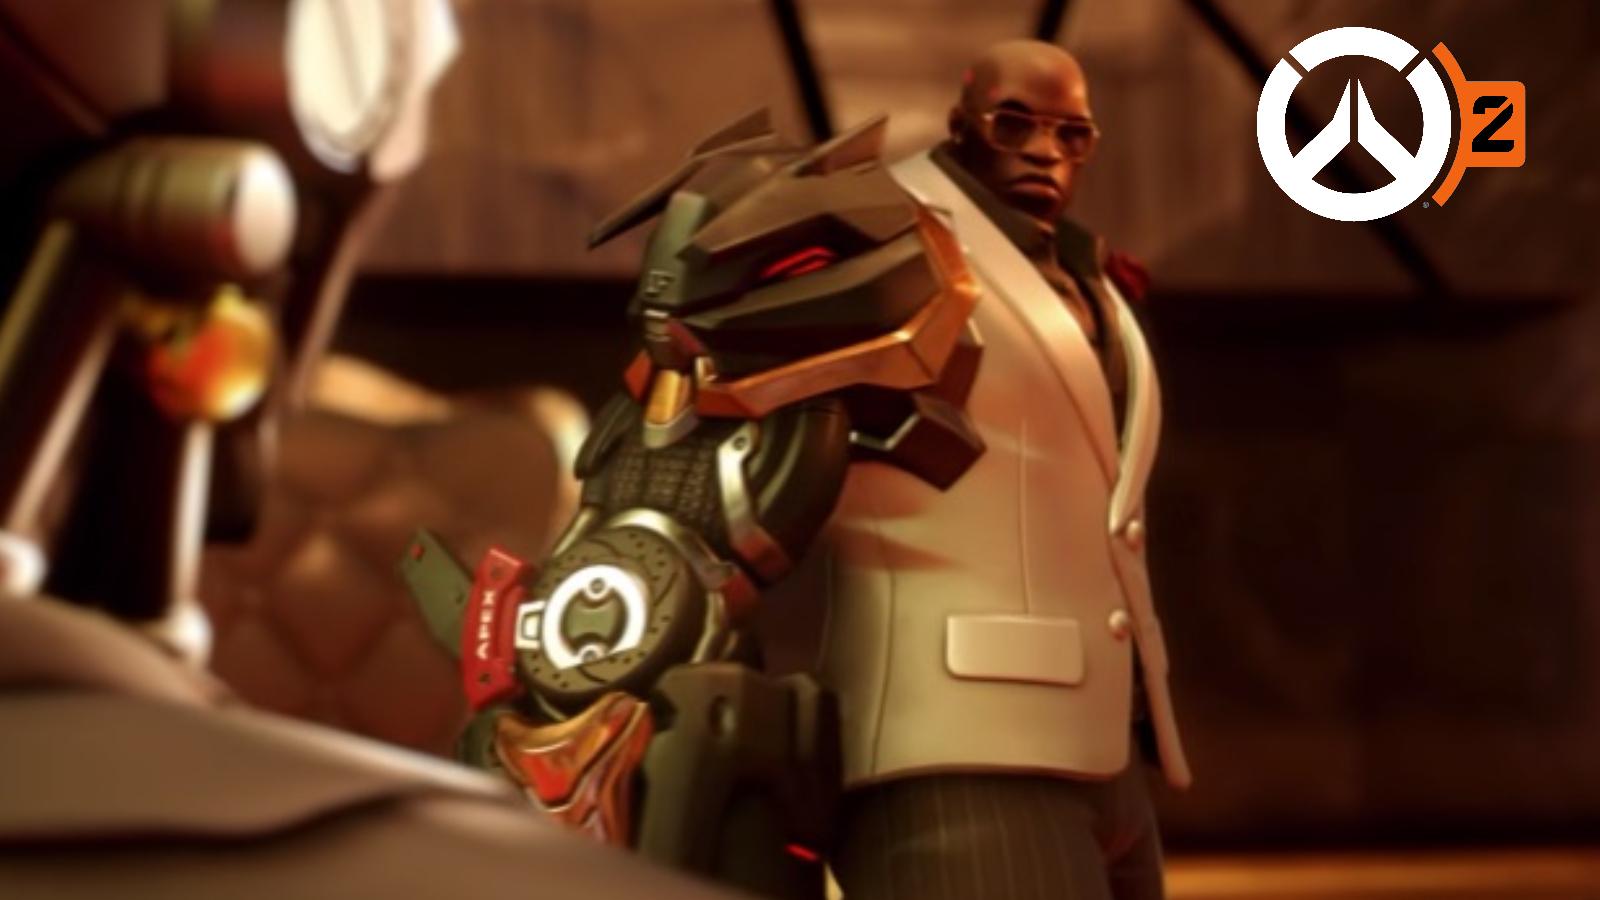 doomfist and sigma in ow2